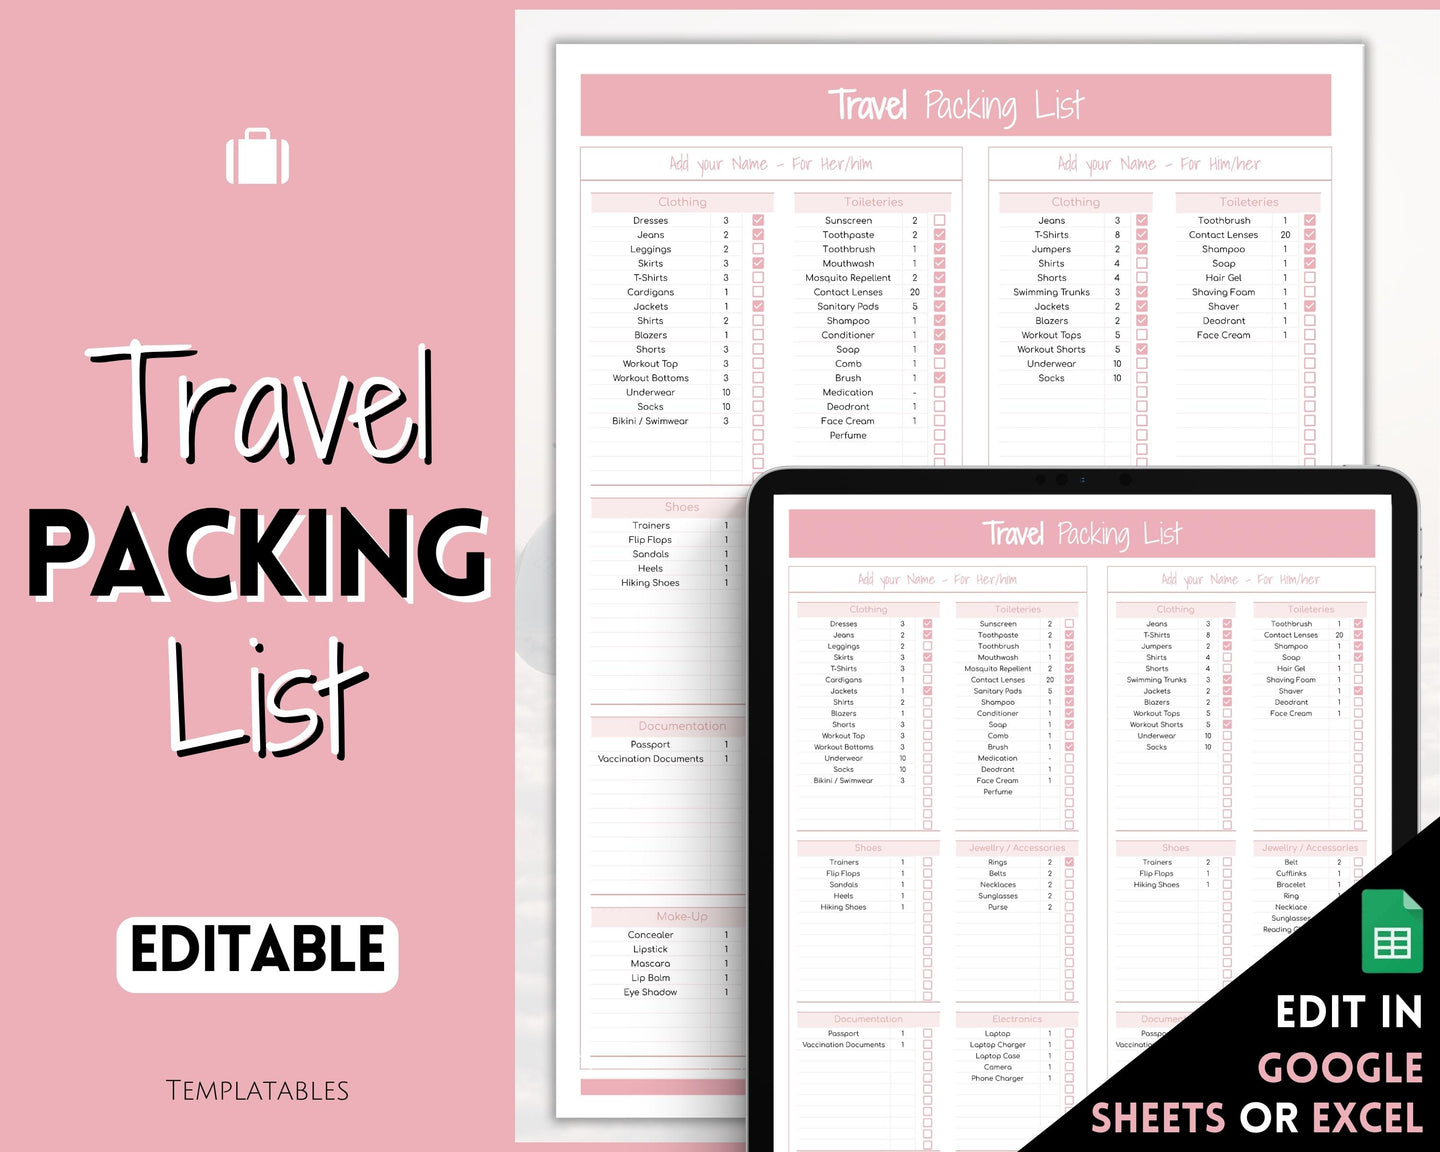 Travel Packing List Template | EDITABLE Google Sheets Packing Checklist for Vacation, Holidays and Cruises